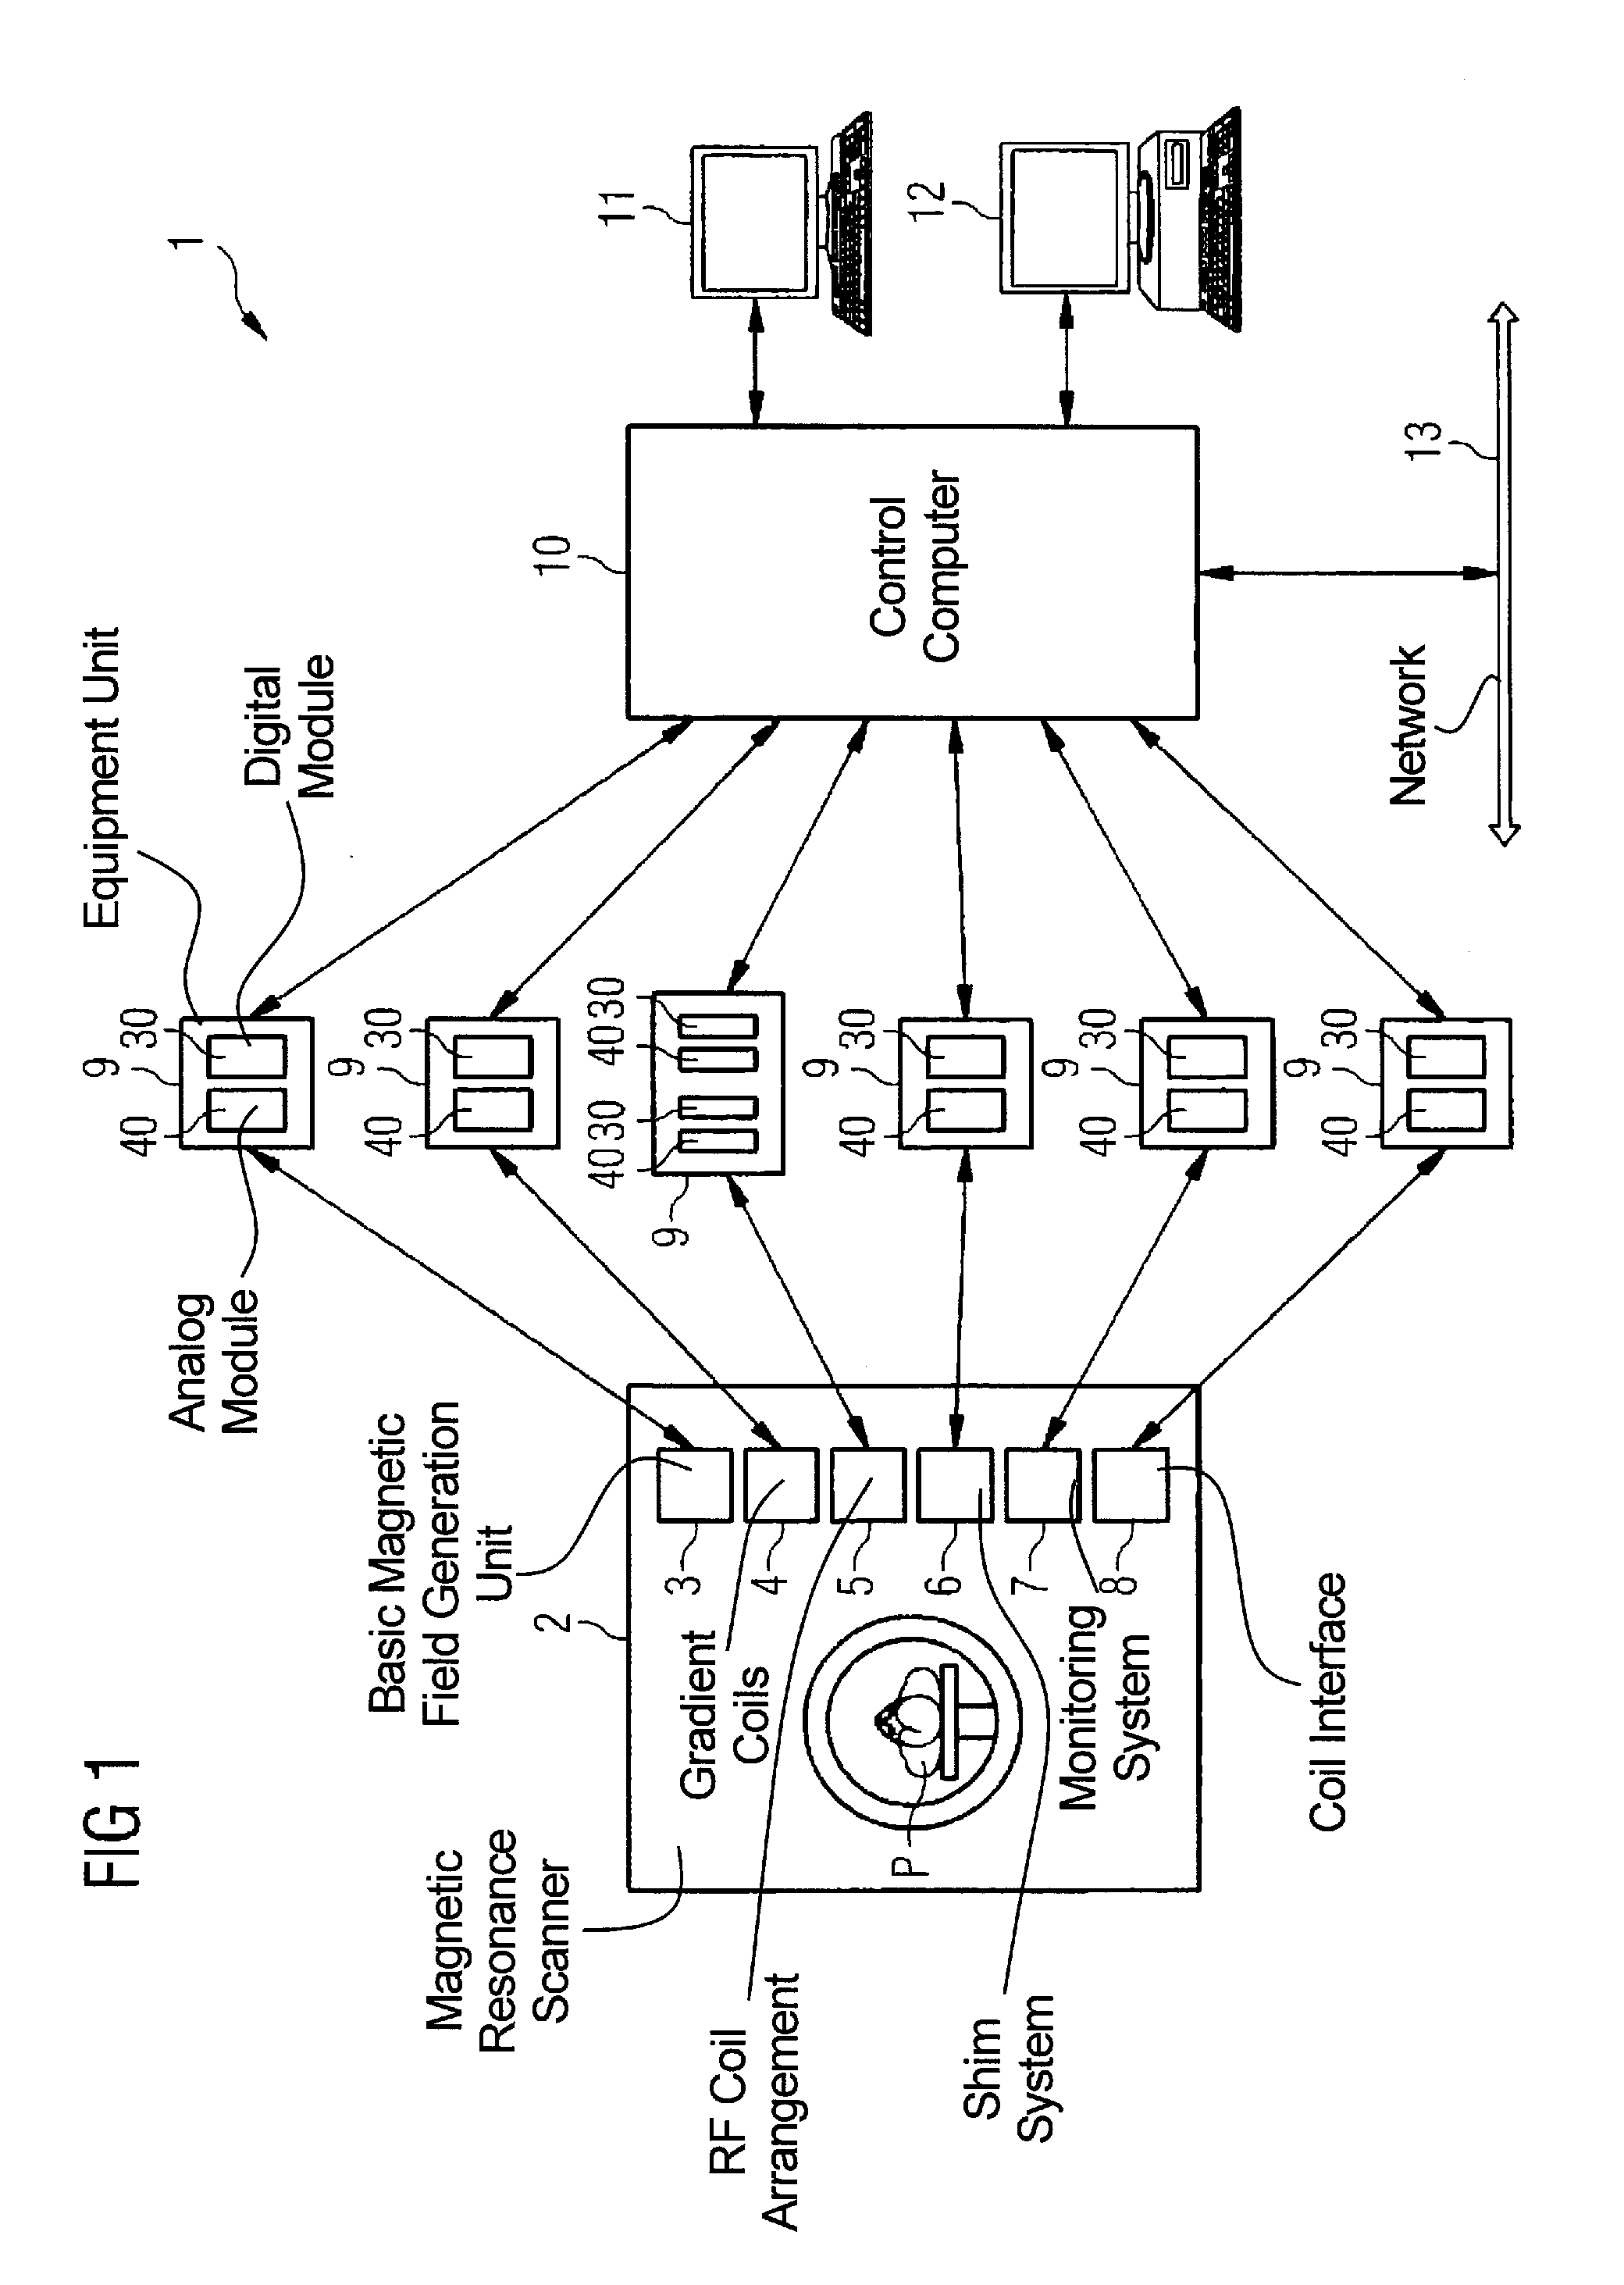 Magnetic resonance system and operating method therefor